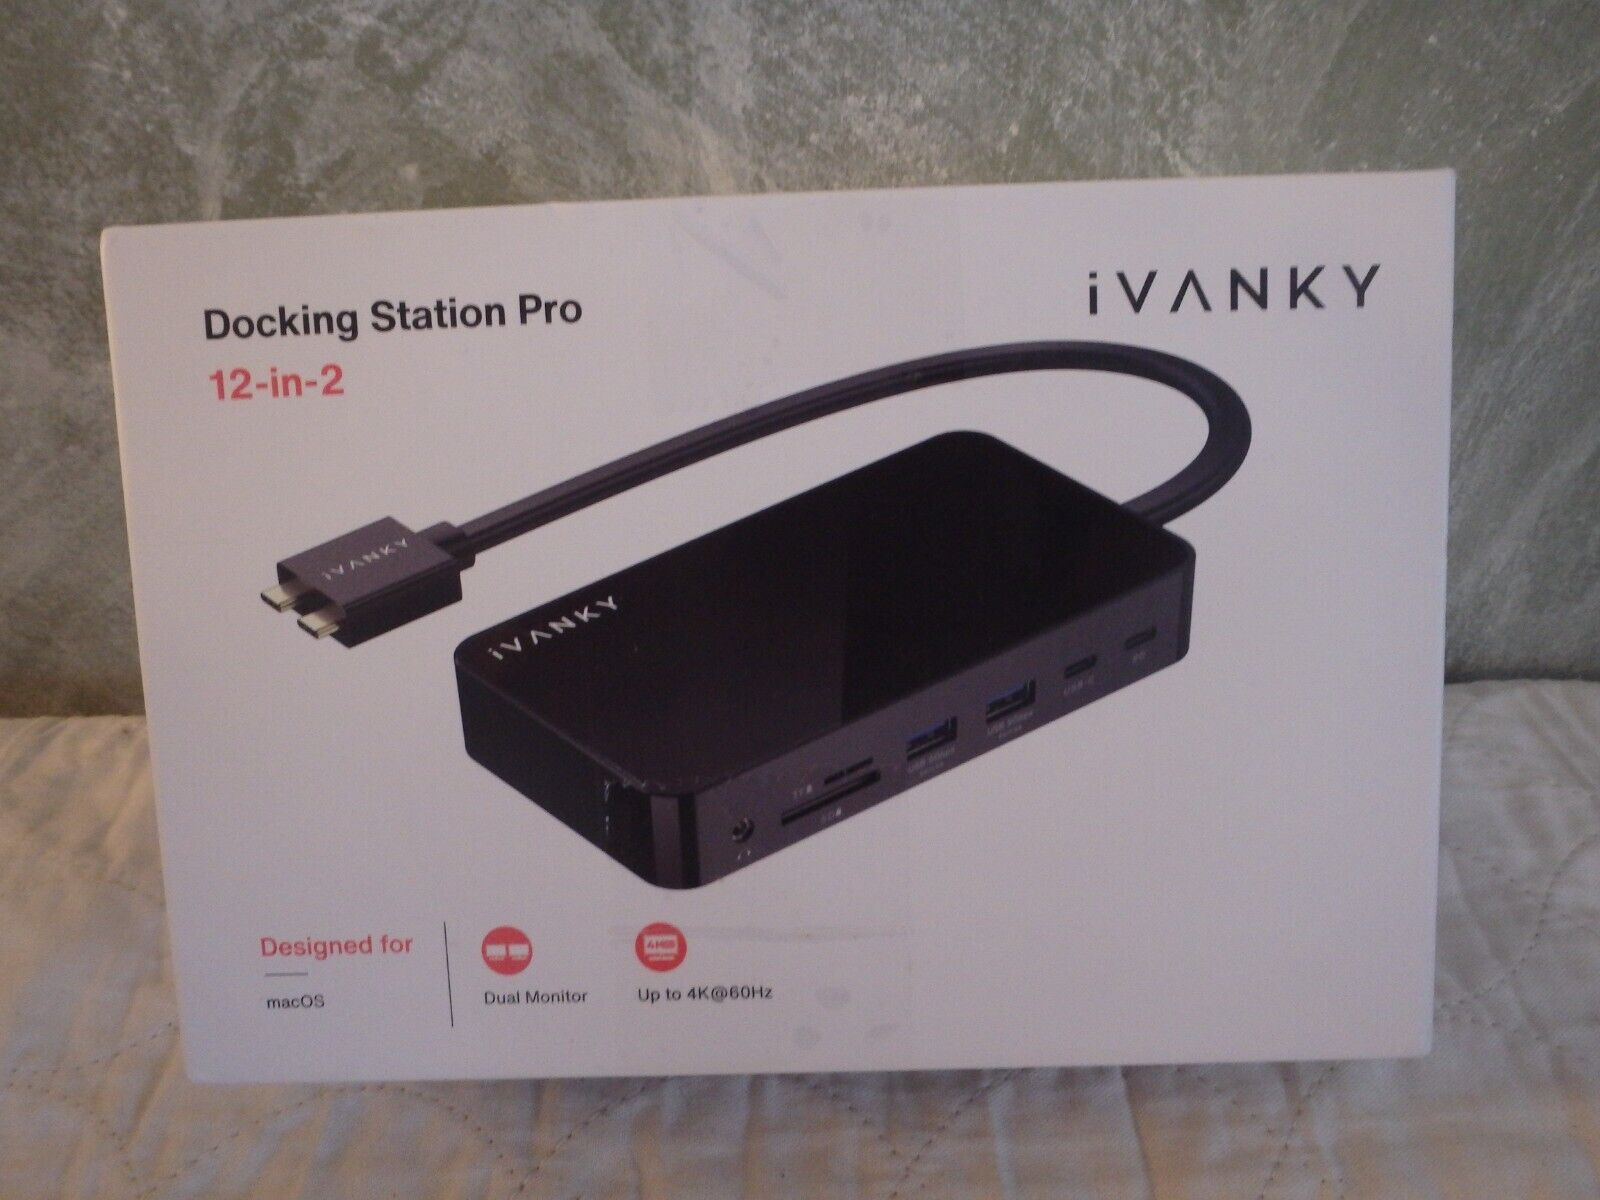 iVANKY FusionDock 1 MacBook Docking Station Pro 12 In 2, with 150W Power Adapter